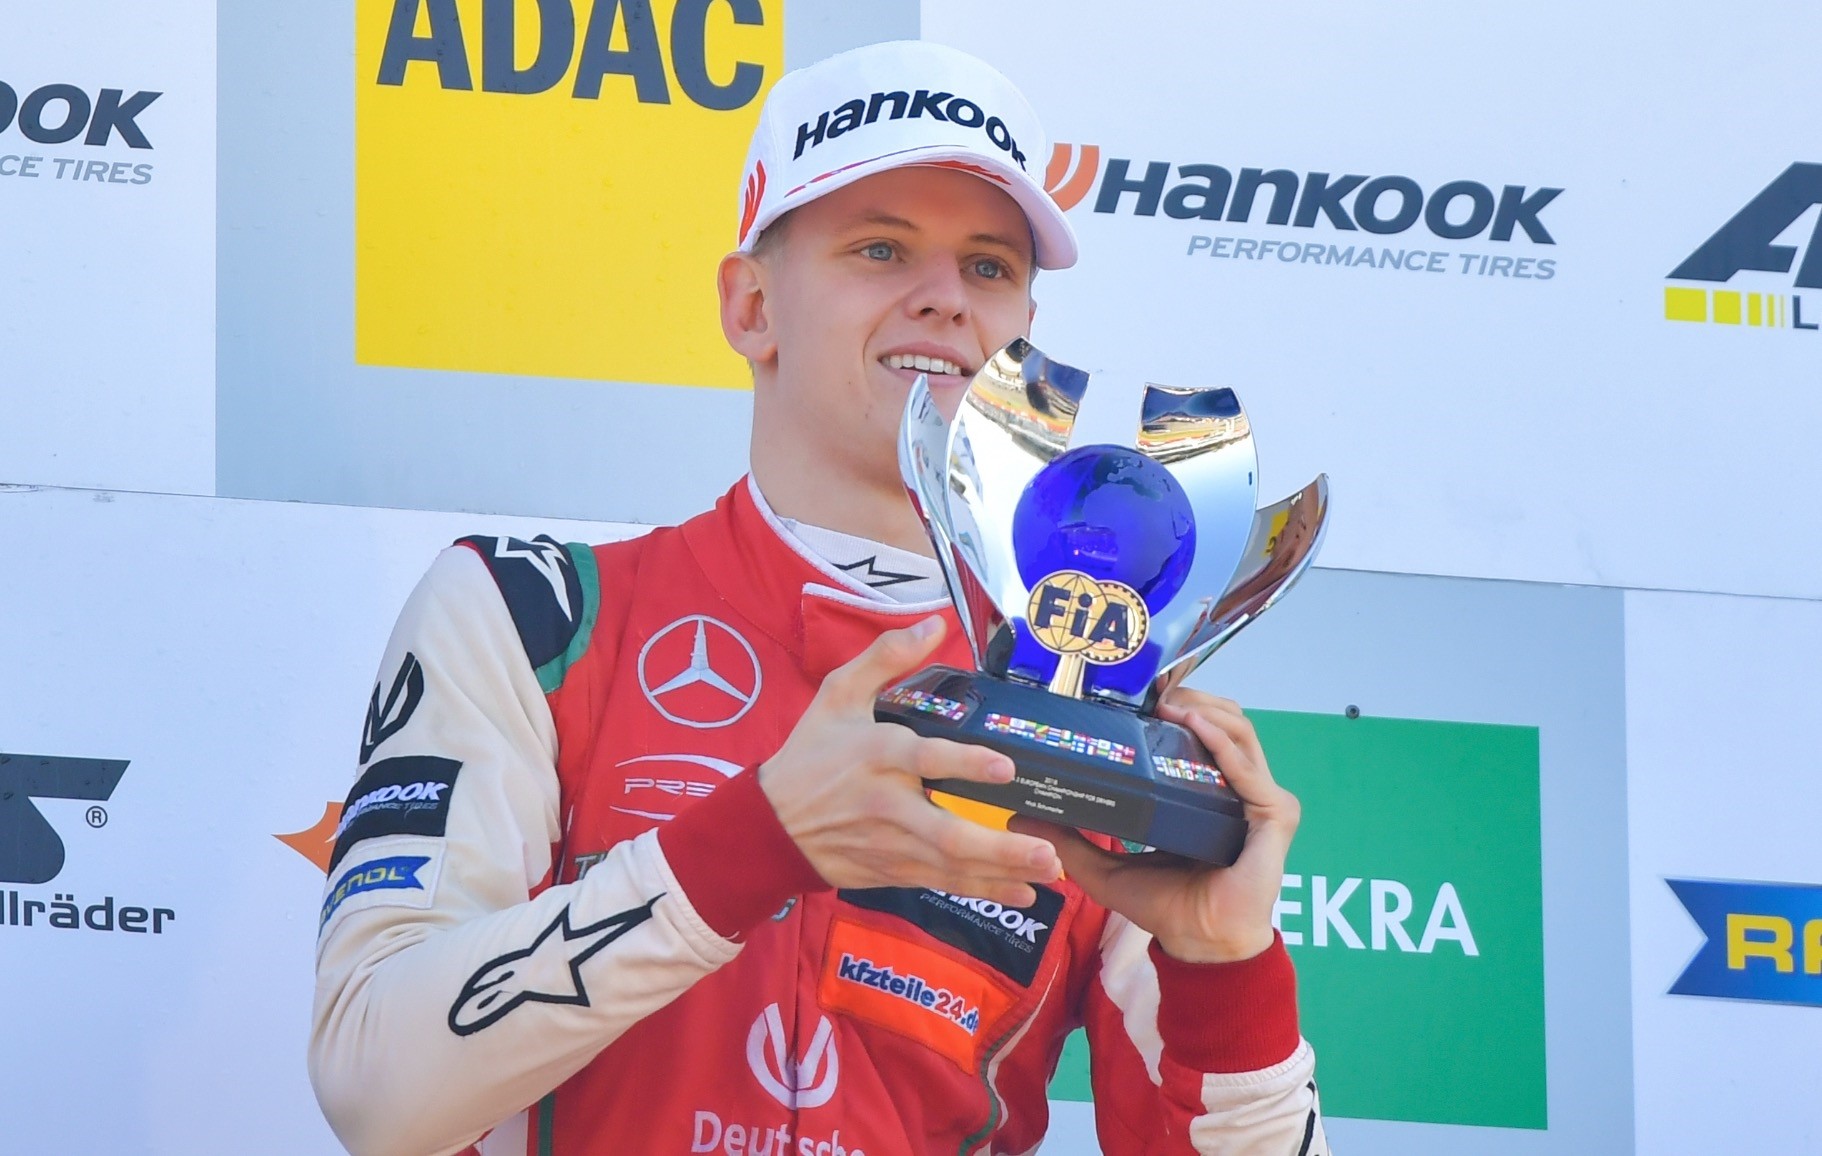 Next stop Mick Schumacher can be one of the greats | Daily Sabah